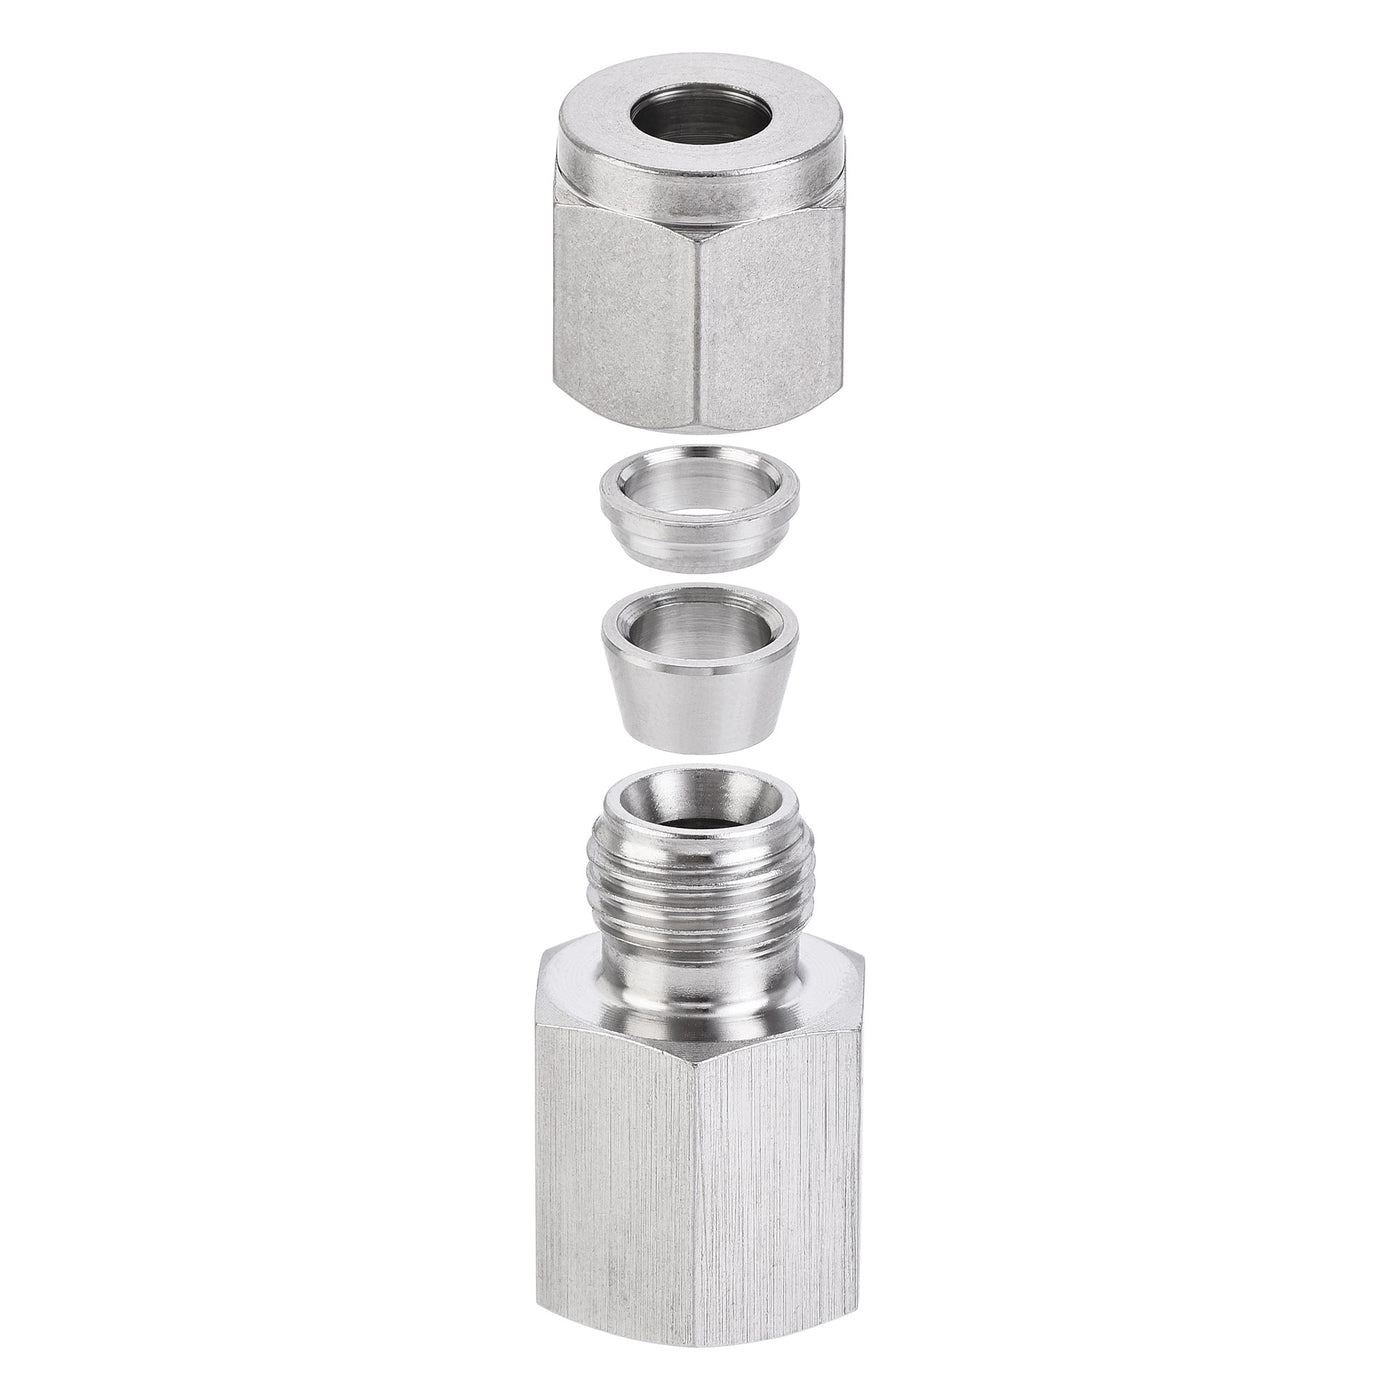 uxcell Uxcell Compression Tube Fitting G1/4 Female Thread x 1/4" Tube OD Straight Coupling Adapter 304 Stainless Steel 2Pcs